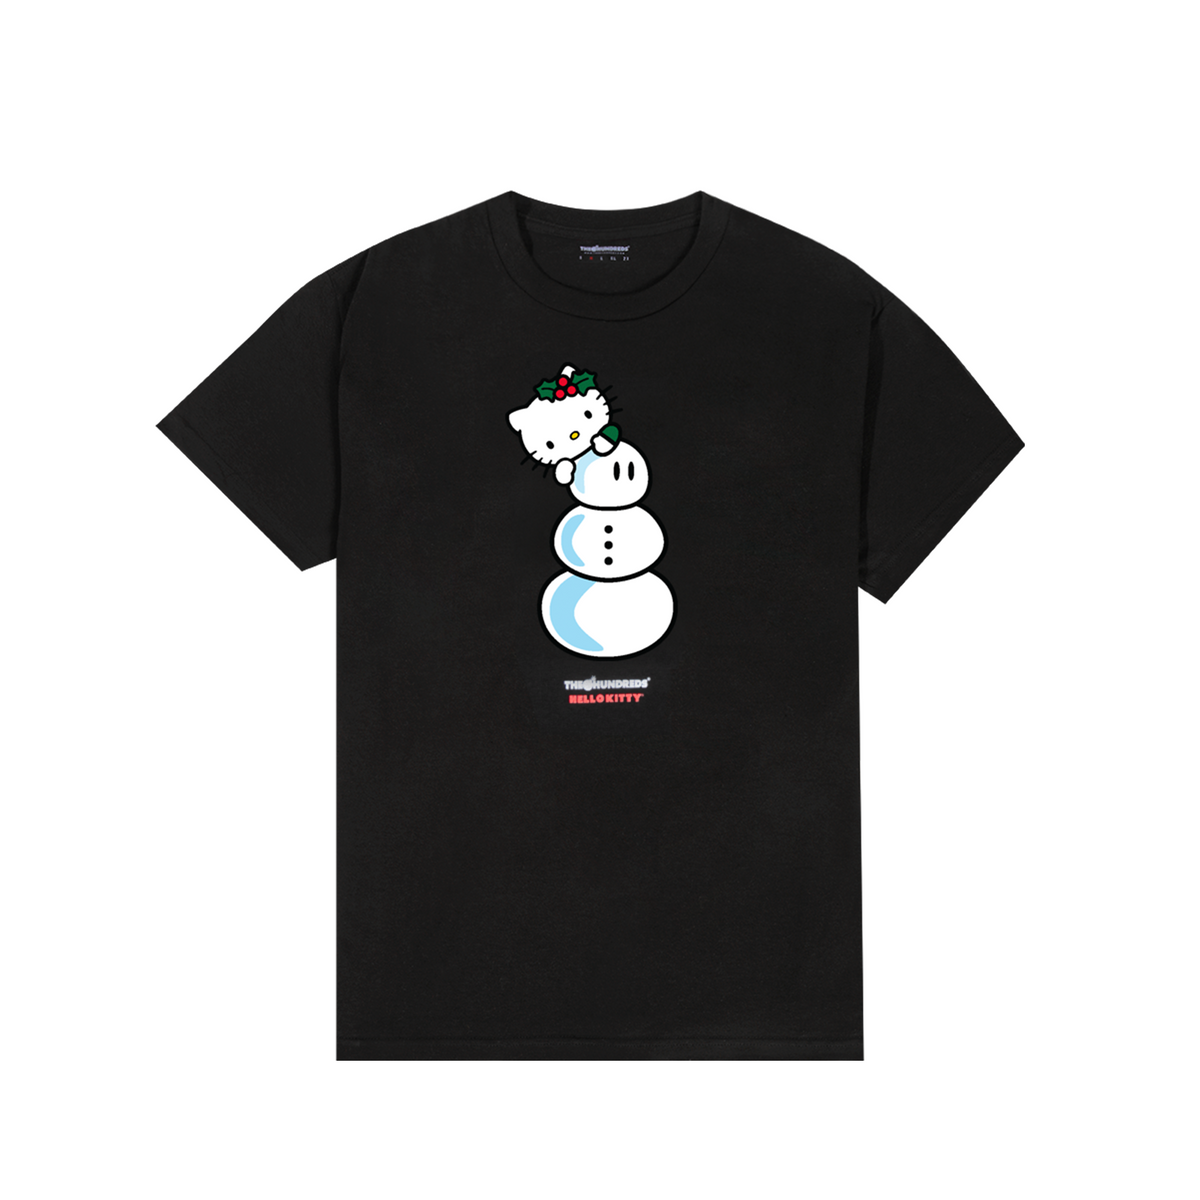 Hello Kitty x The Hundreds Snowman Tee Apparel The Hundreds is Huge   